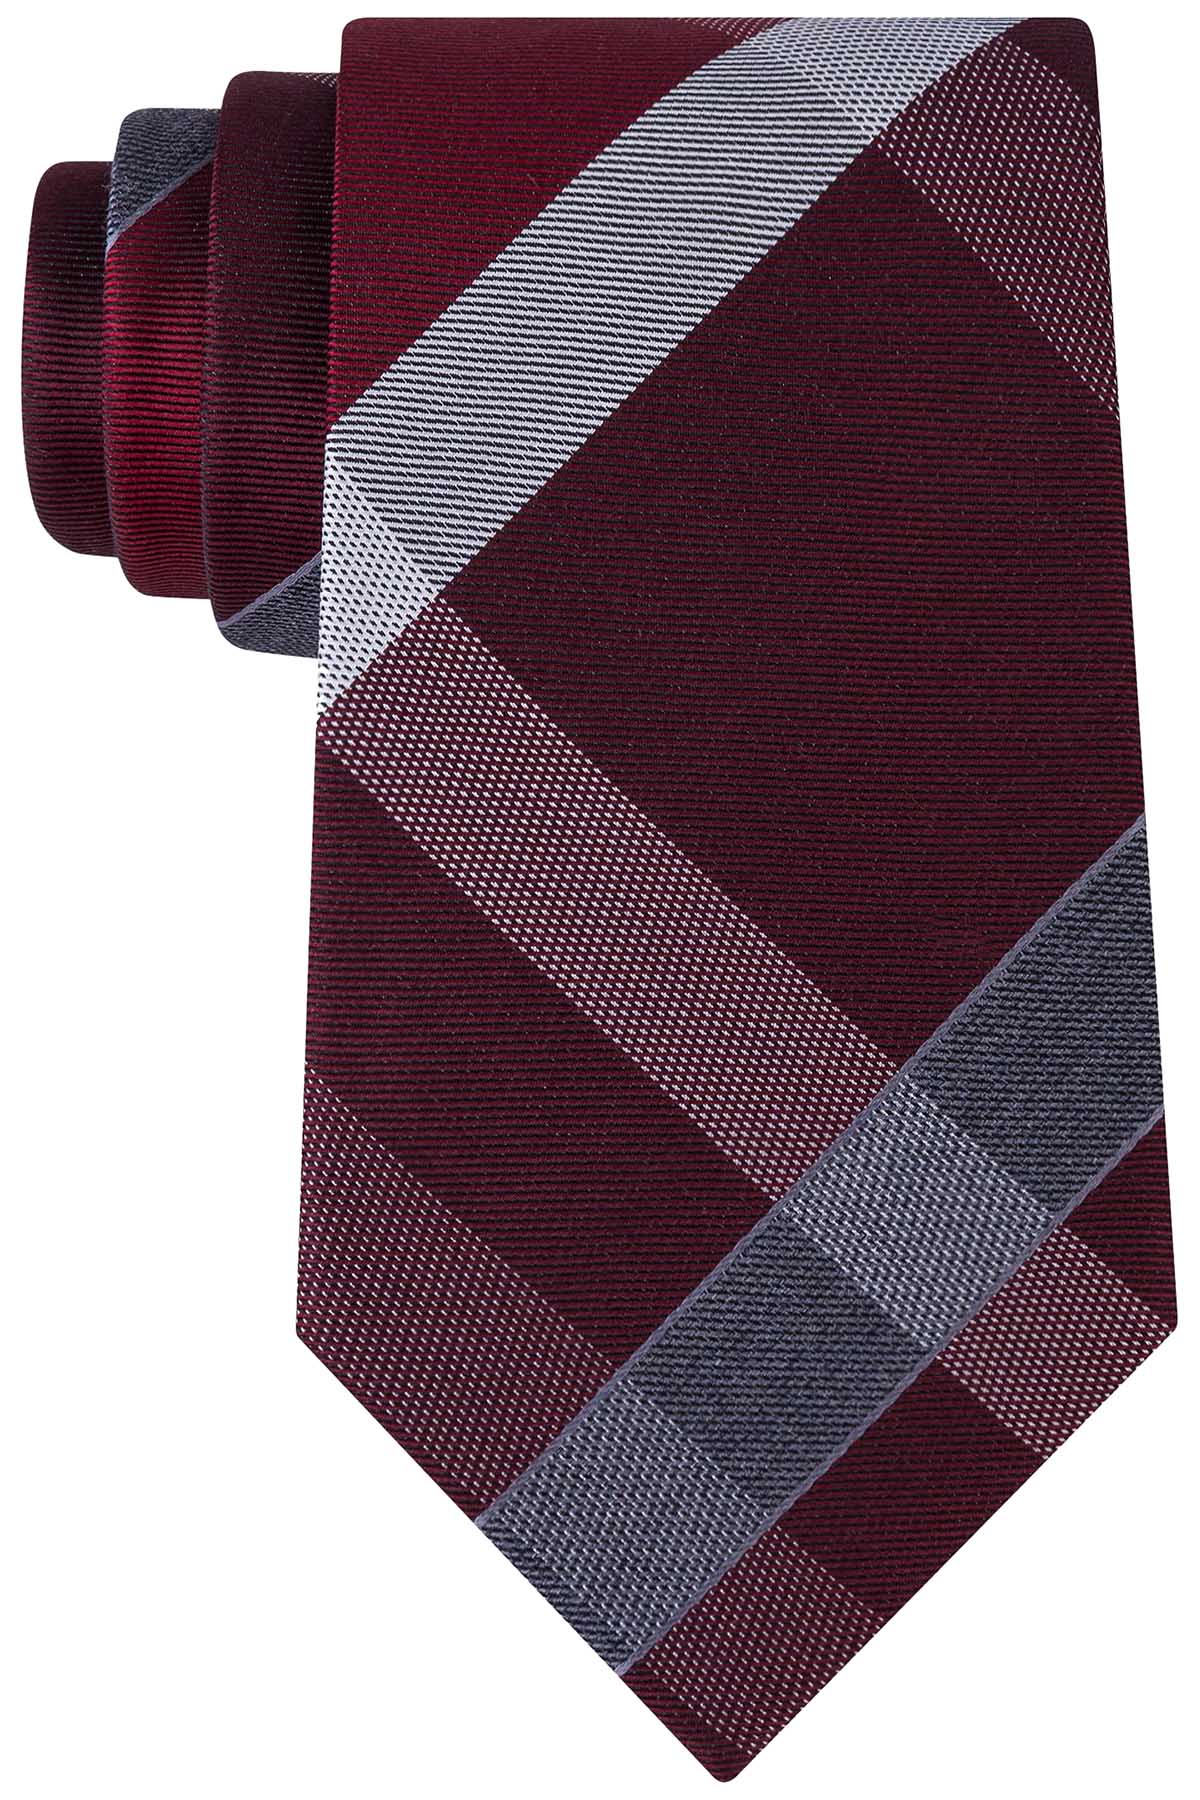 Kenneth Cole Reaction Burgundy Track Plaid Tie